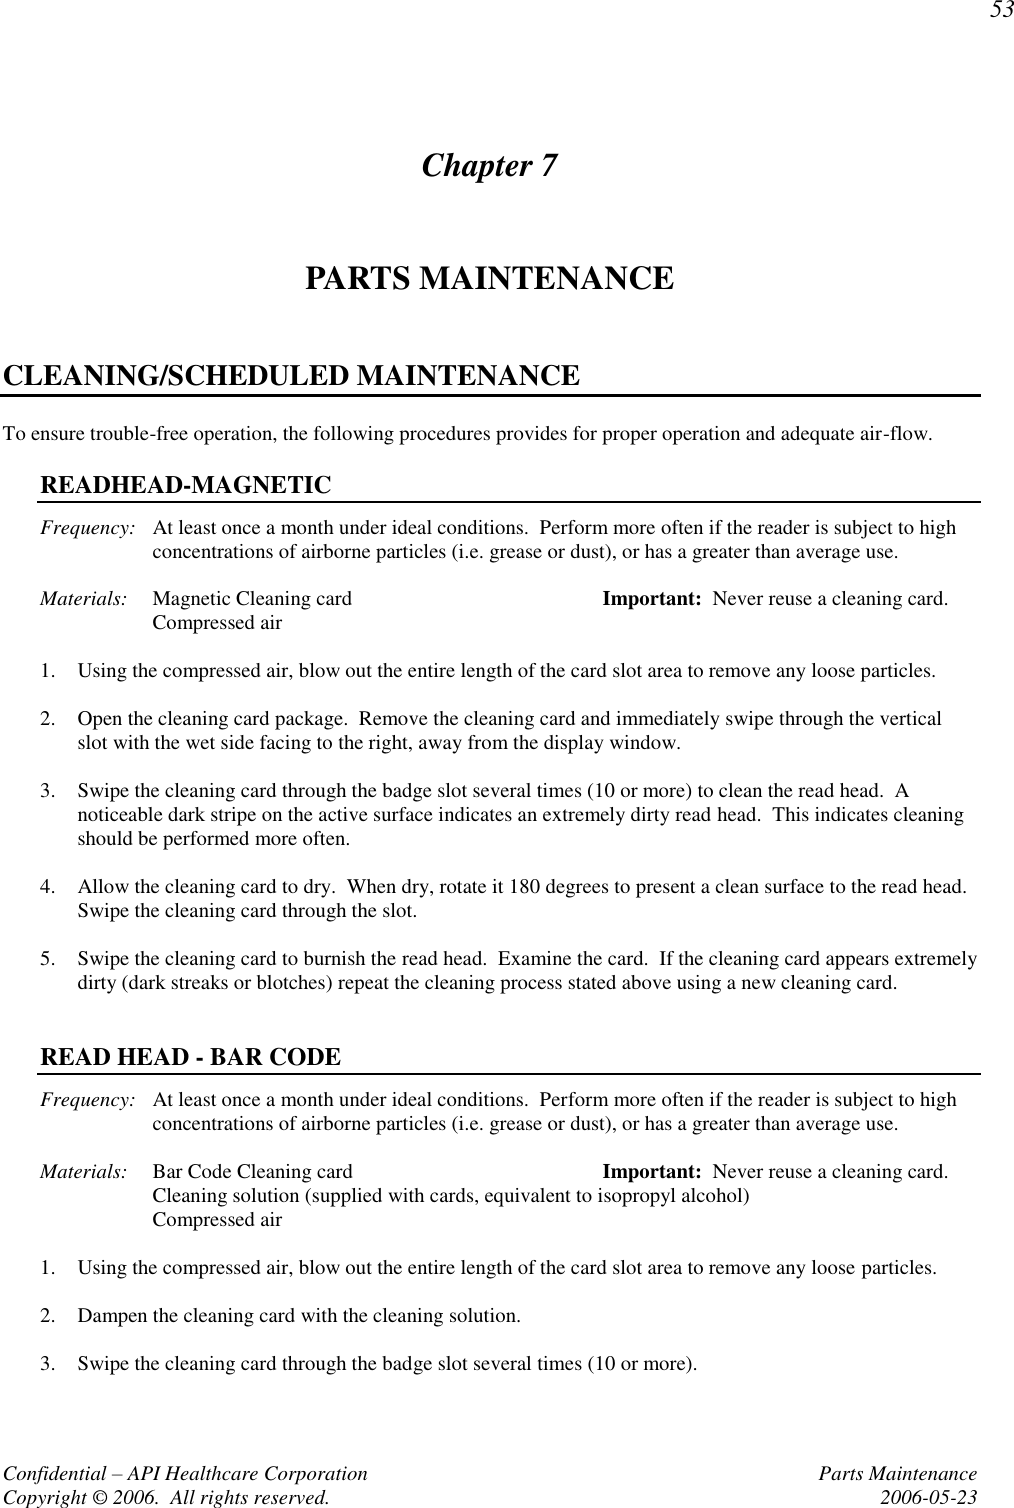 53 Confidential – API Healthcare Corporation  Parts Maintenance Copyright © 2006.  All rights reserved.  2006-05-23 Chapter 7 PARTS MAINTENANCE  CLEANING/SCHEDULED MAINTENANCE To ensure trouble-free operation, the following procedures provides for proper operation and adequate air-flow.  READHEAD-MAGNETIC Frequency:  At least once a month under ideal conditions.  Perform more often if the reader is subject to high concentrations of airborne particles (i.e. grease or dust), or has a greater than average use.  Materials:  Magnetic Cleaning card  Important:  Never reuse a cleaning card.   Compressed air  1. Using the compressed air, blow out the entire length of the card slot area to remove any loose particles.  2. Open the cleaning card package.  Remove the cleaning card and immediately swipe through the vertical slot with the wet side facing to the right, away from the display window.  3. Swipe the cleaning card through the badge slot several times (10 or more) to clean the read head.  A noticeable dark stripe on the active surface indicates an extremely dirty read head.  This indicates cleaning should be performed more often.  4. Allow the cleaning card to dry.  When dry, rotate it 180 degrees to present a clean surface to the read head.  Swipe the cleaning card through the slot.  5. Swipe the cleaning card to burnish the read head.  Examine the card.  If the cleaning card appears extremely dirty (dark streaks or blotches) repeat the cleaning process stated above using a new cleaning card.   READ HEAD - BAR CODE Frequency:  At least once a month under ideal conditions.  Perform more often if the reader is subject to high concentrations of airborne particles (i.e. grease or dust), or has a greater than average use.  Materials:  Bar Code Cleaning card   Important:  Never reuse a cleaning card.   Cleaning solution (supplied with cards, equivalent to isopropyl alcohol)   Compressed air  1. Using the compressed air, blow out the entire length of the card slot area to remove any loose particles.  2. Dampen the cleaning card with the cleaning solution.  3. Swipe the cleaning card through the badge slot several times (10 or more).  